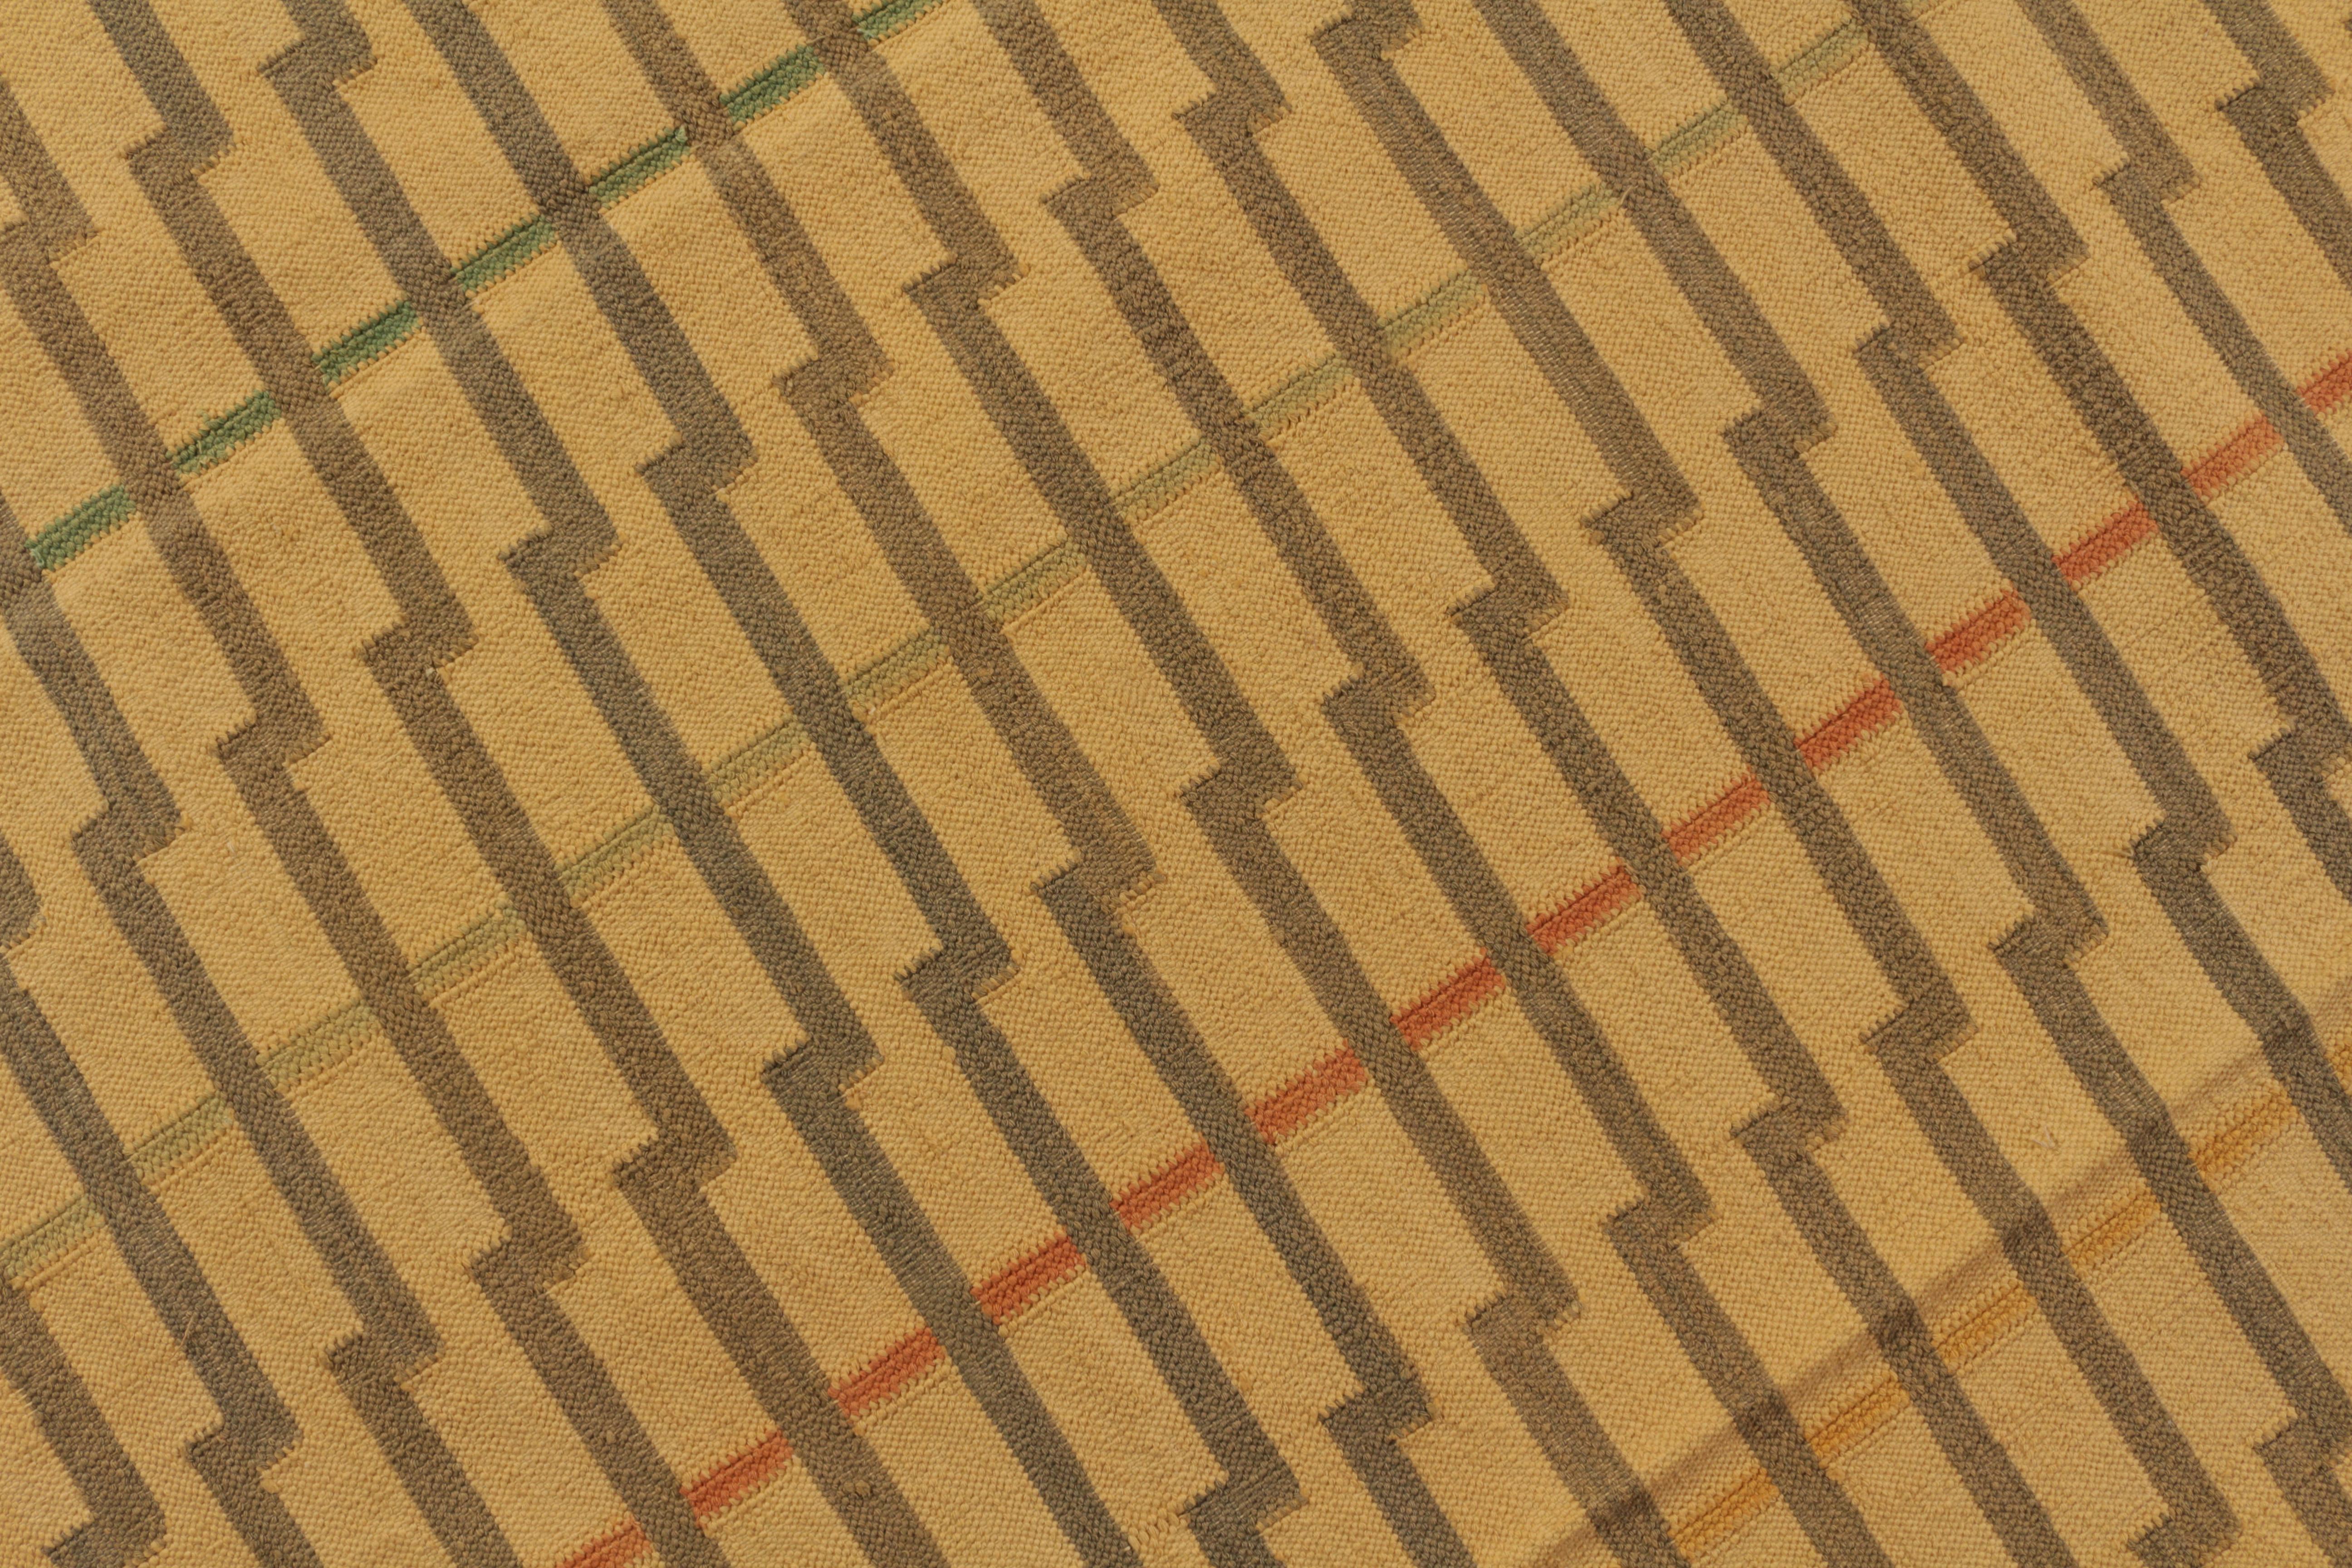 Hand-Woven Rug & Kilim's Contemporary Striped Flat-Weave Beige Brown Pattern